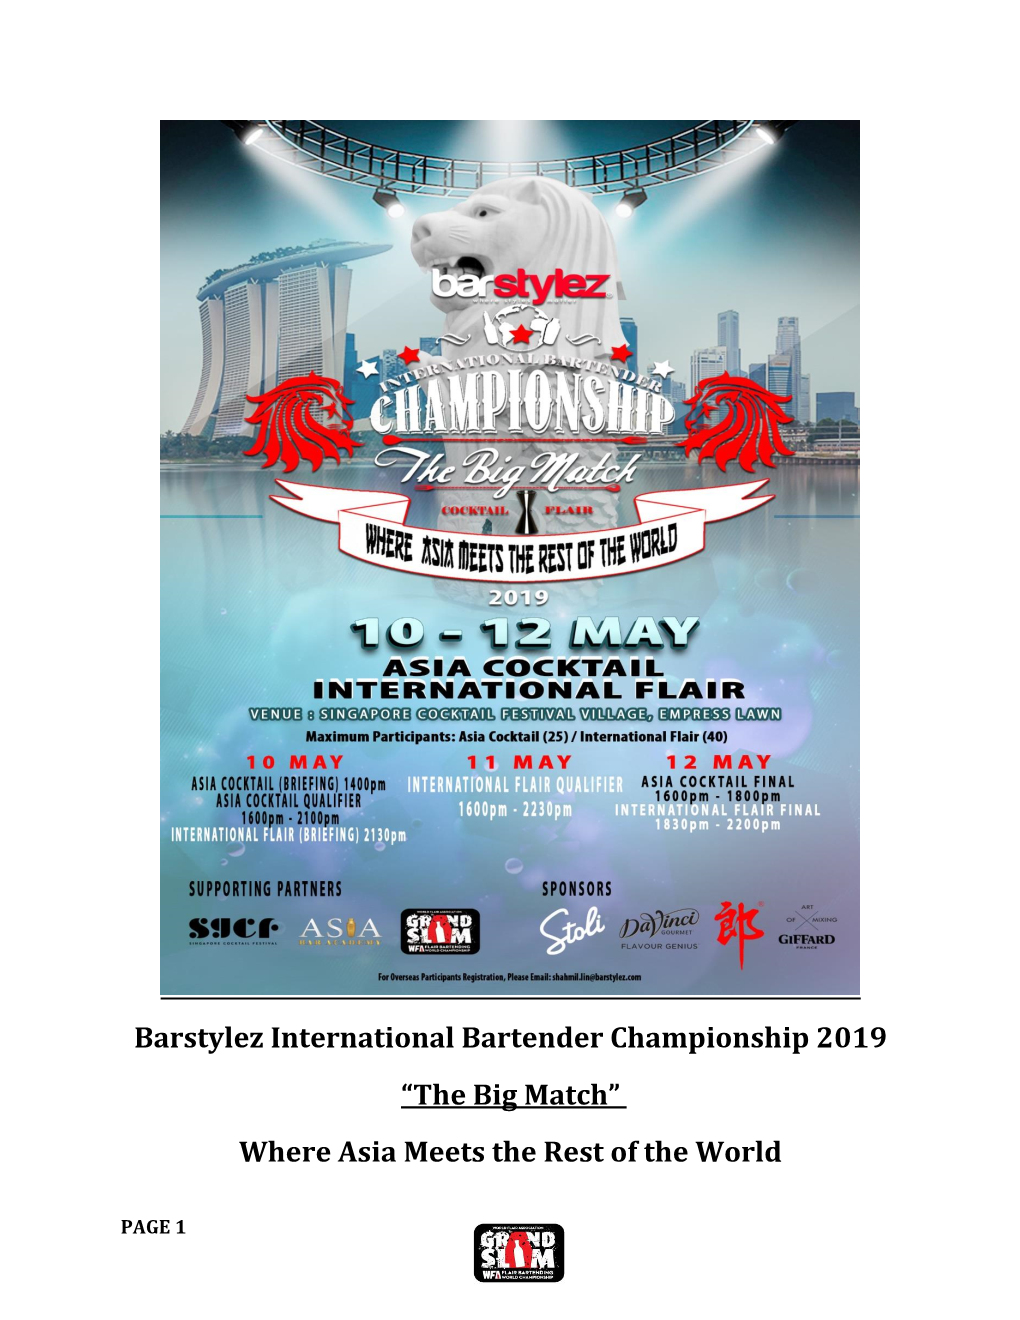 Barstylez International Bartender Championship 2019 “The Big Match” Where Asia Meets the Rest of the World